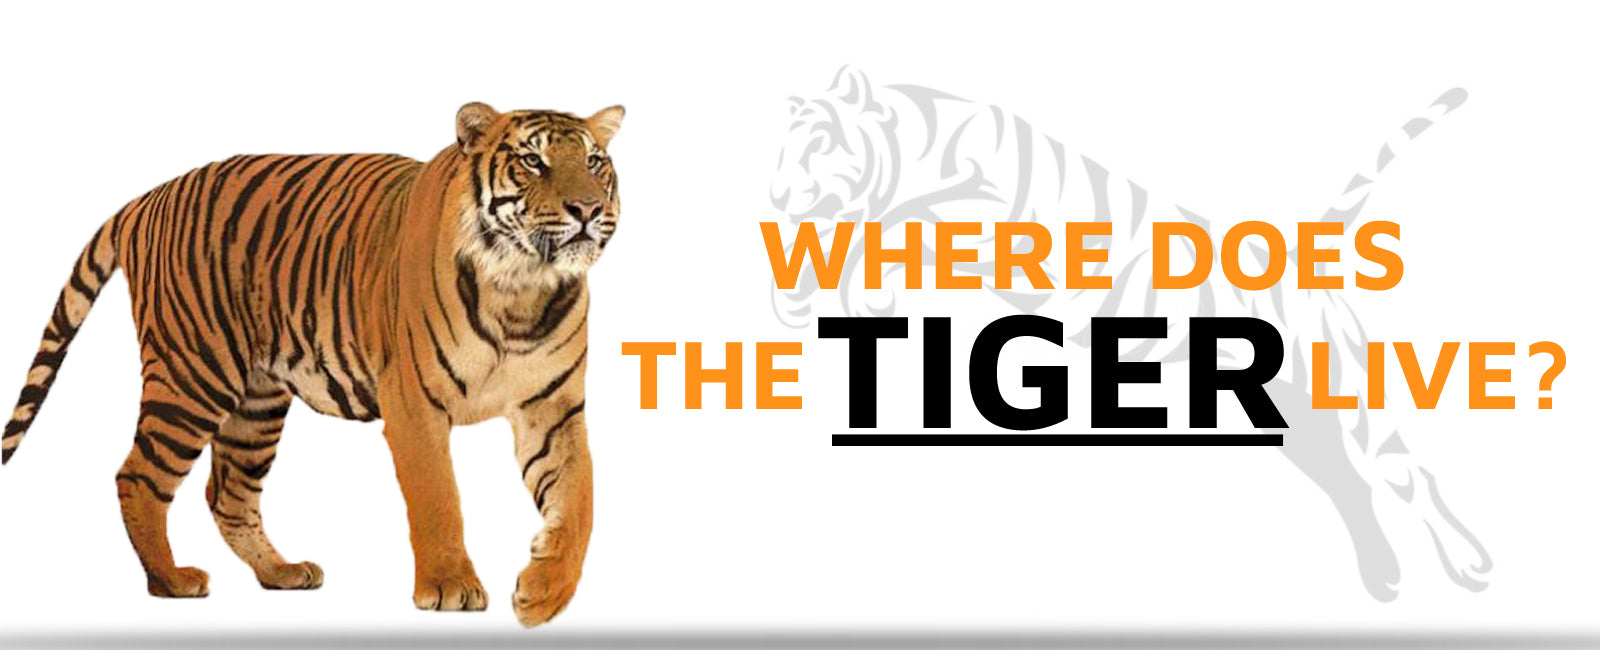 Where does the Tiger Live?